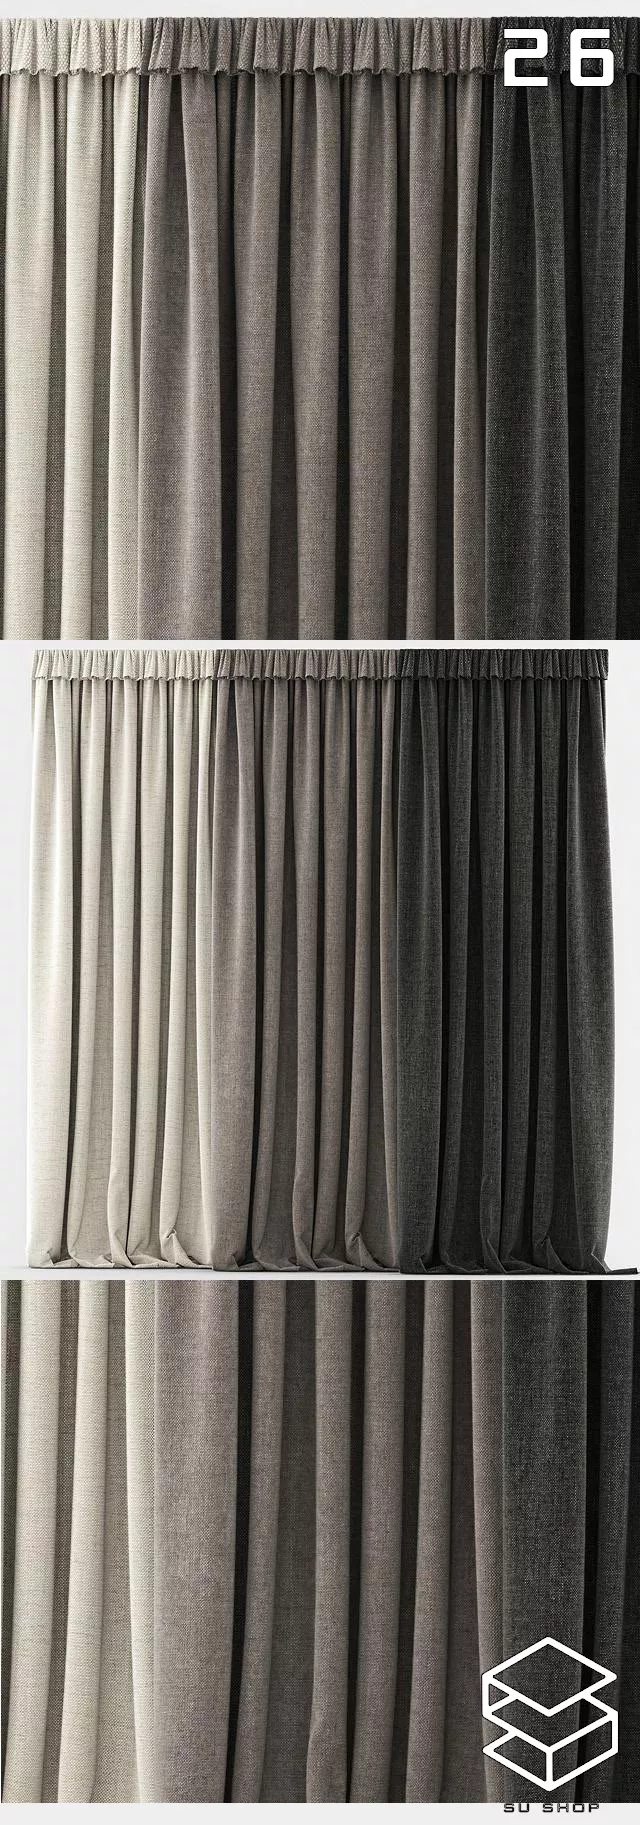 MODERN CURTAIN - SKETCHUP 3D MODEL - VRAY OR ENSCAPE - ID05483